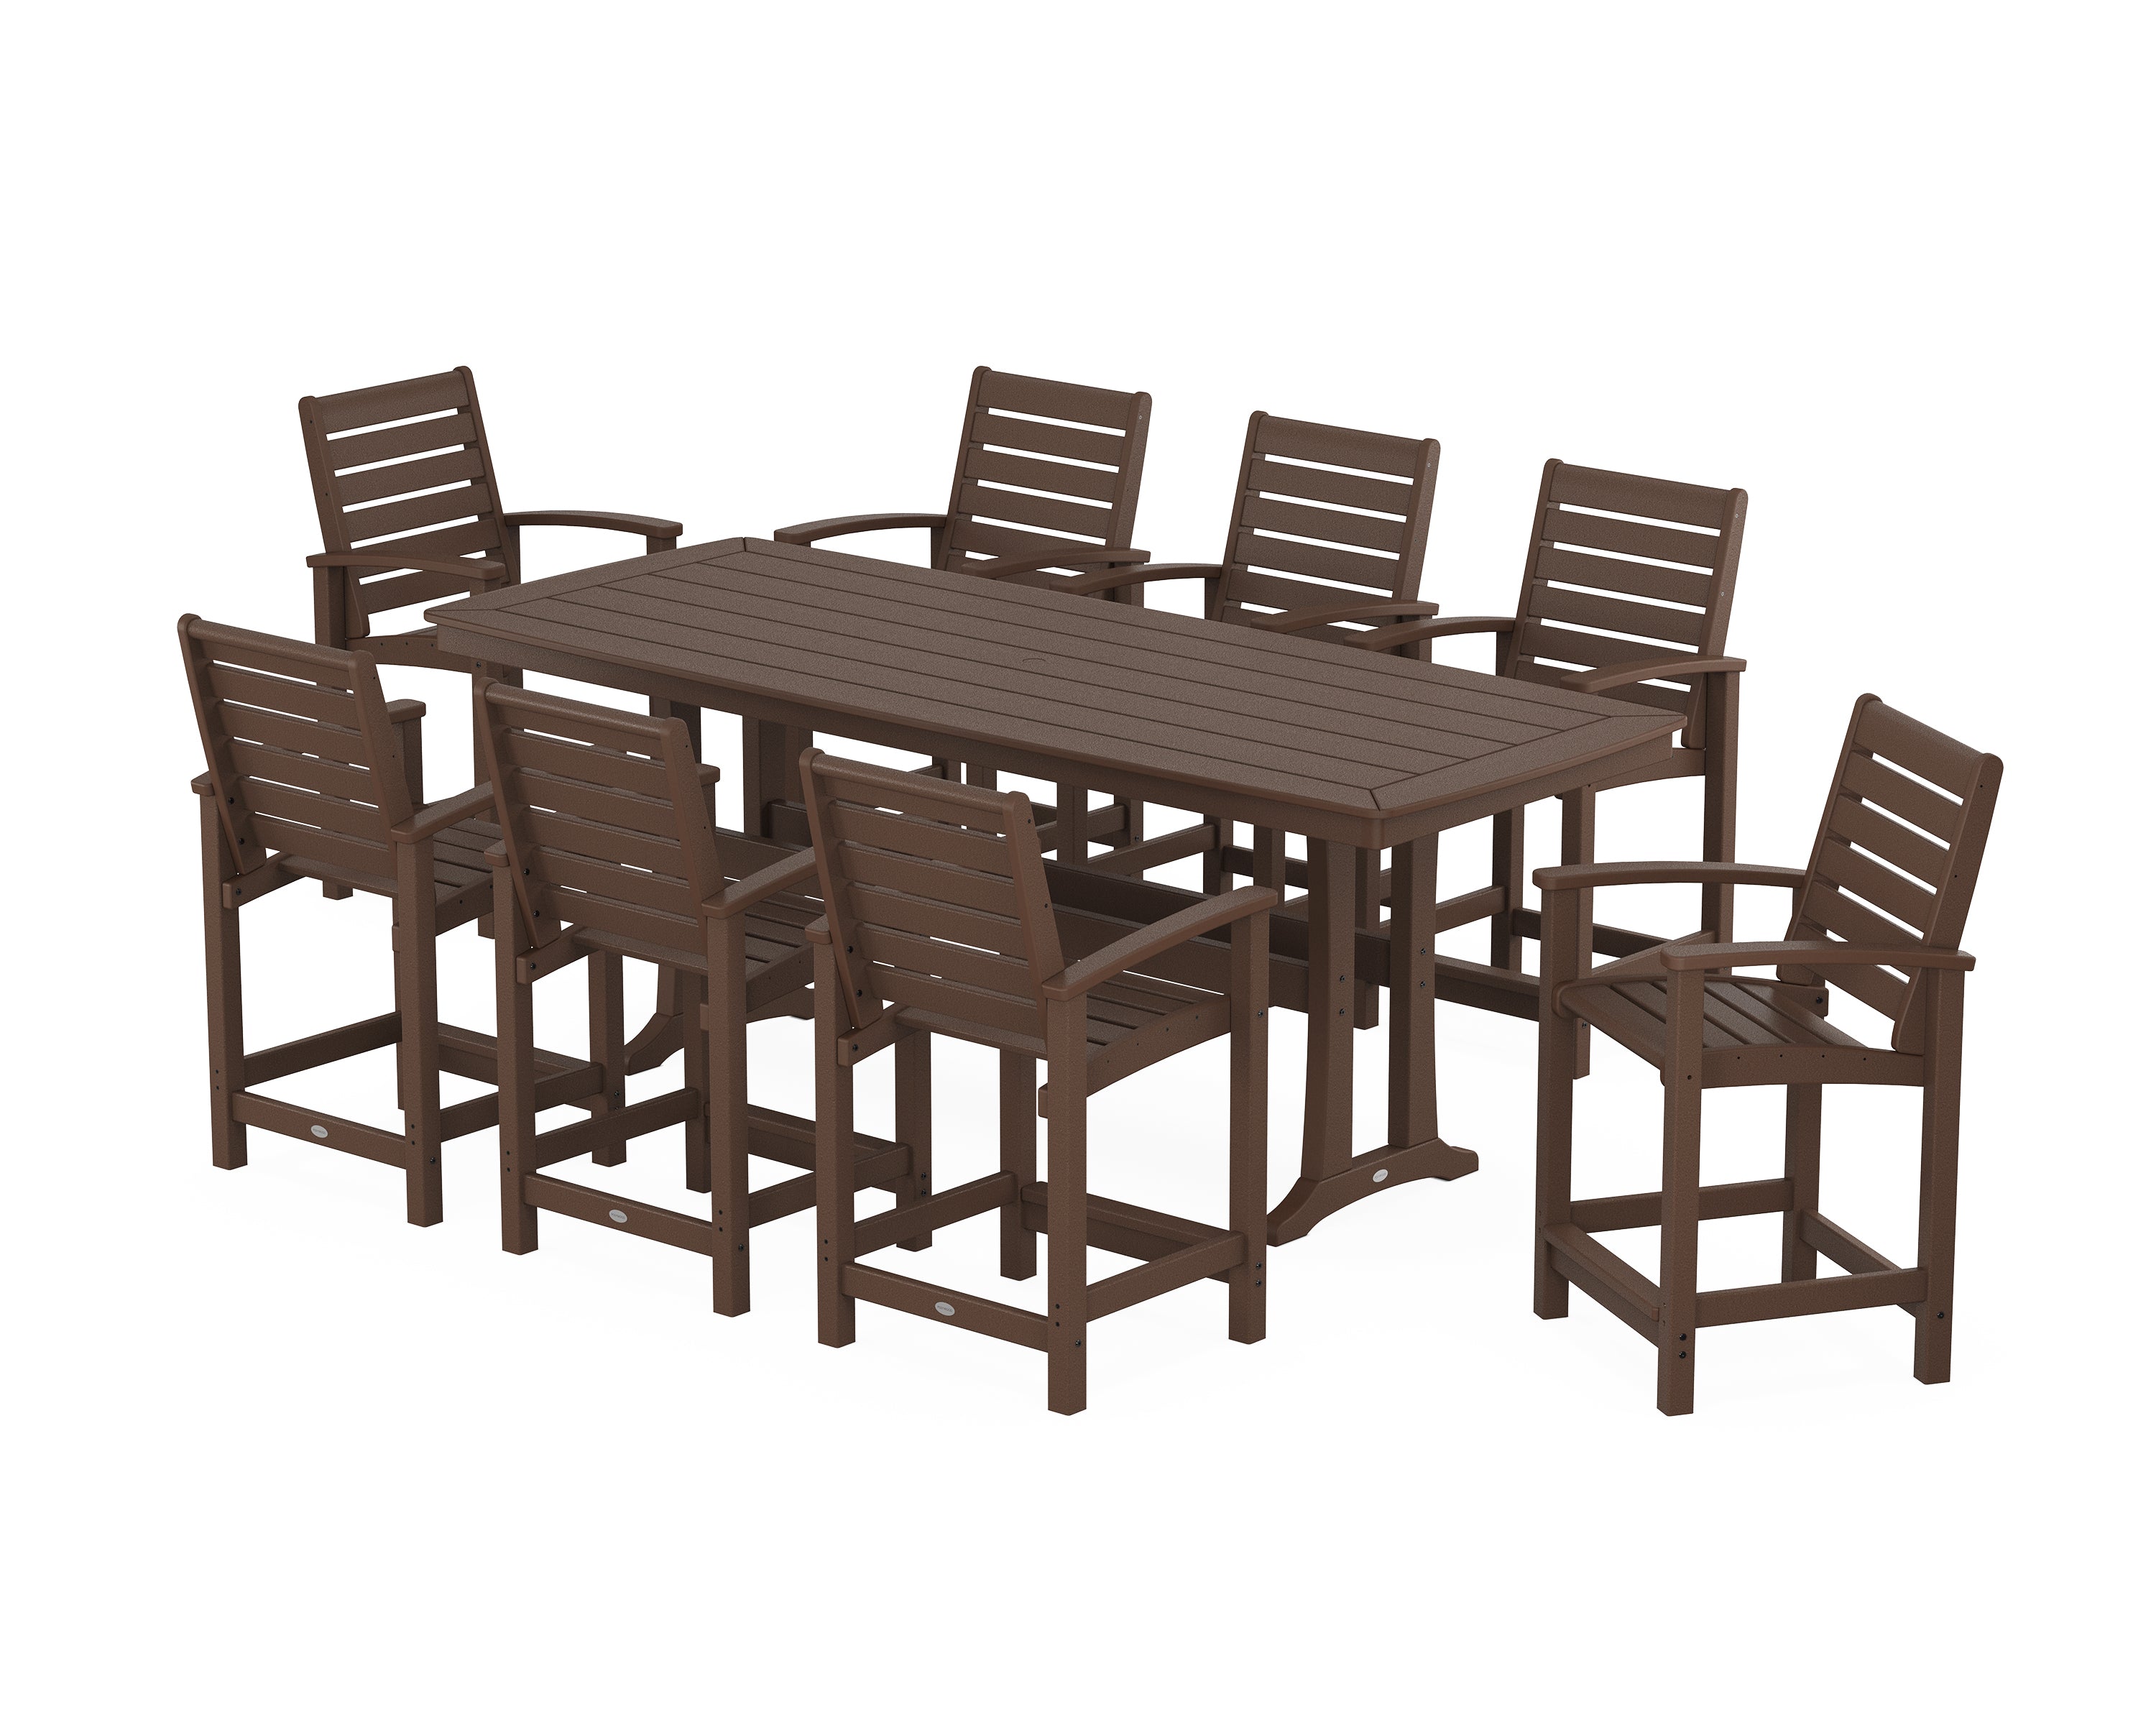 POLYWOOD® Signature 9-Piece Counter Set with Trestle Legs in Mahogany